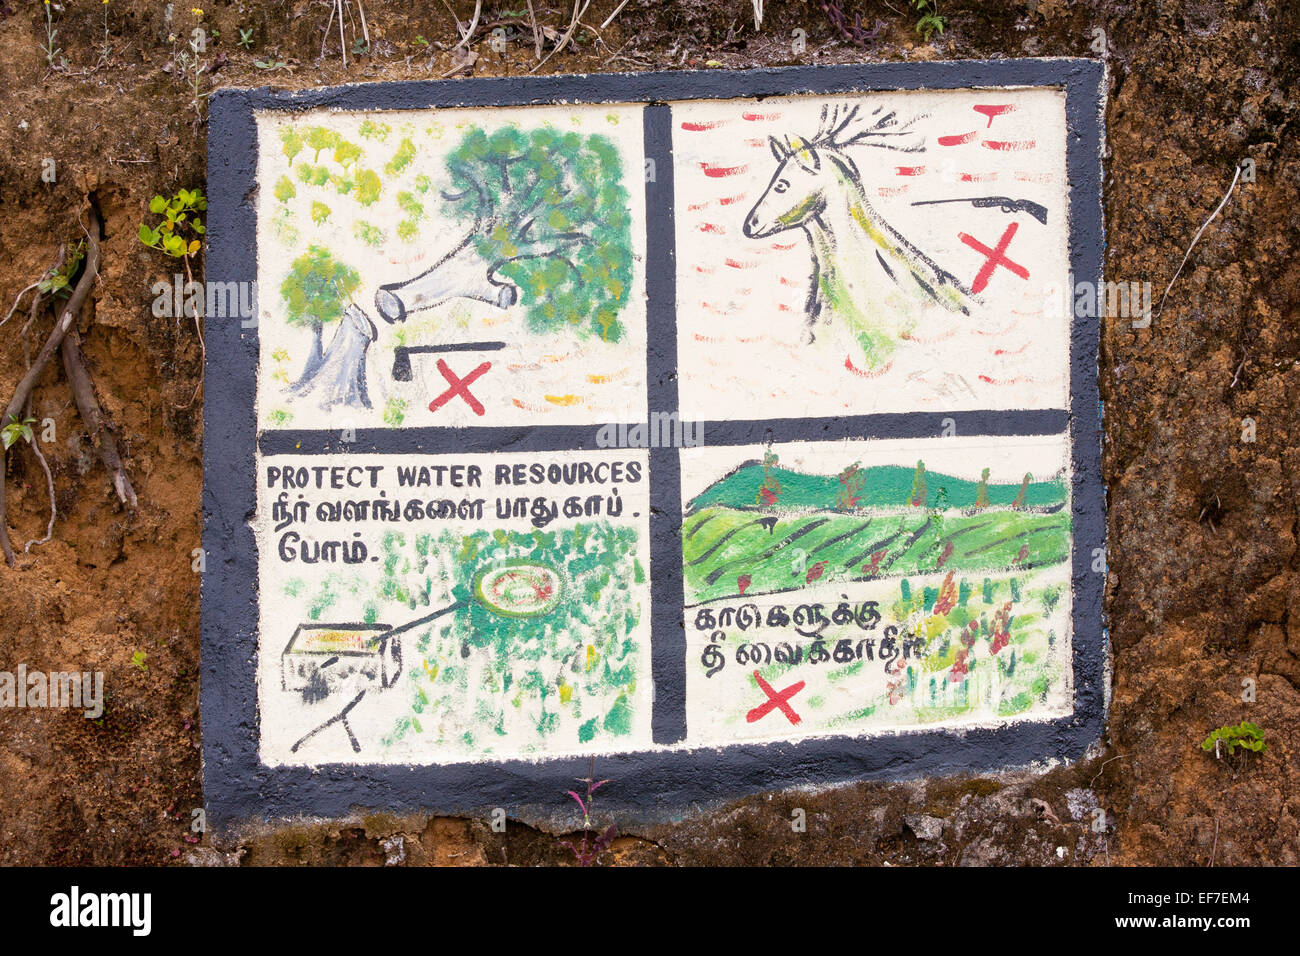 TEA PLANTATION SIGN; PROTECT WATER RESOURCES Stock Photo